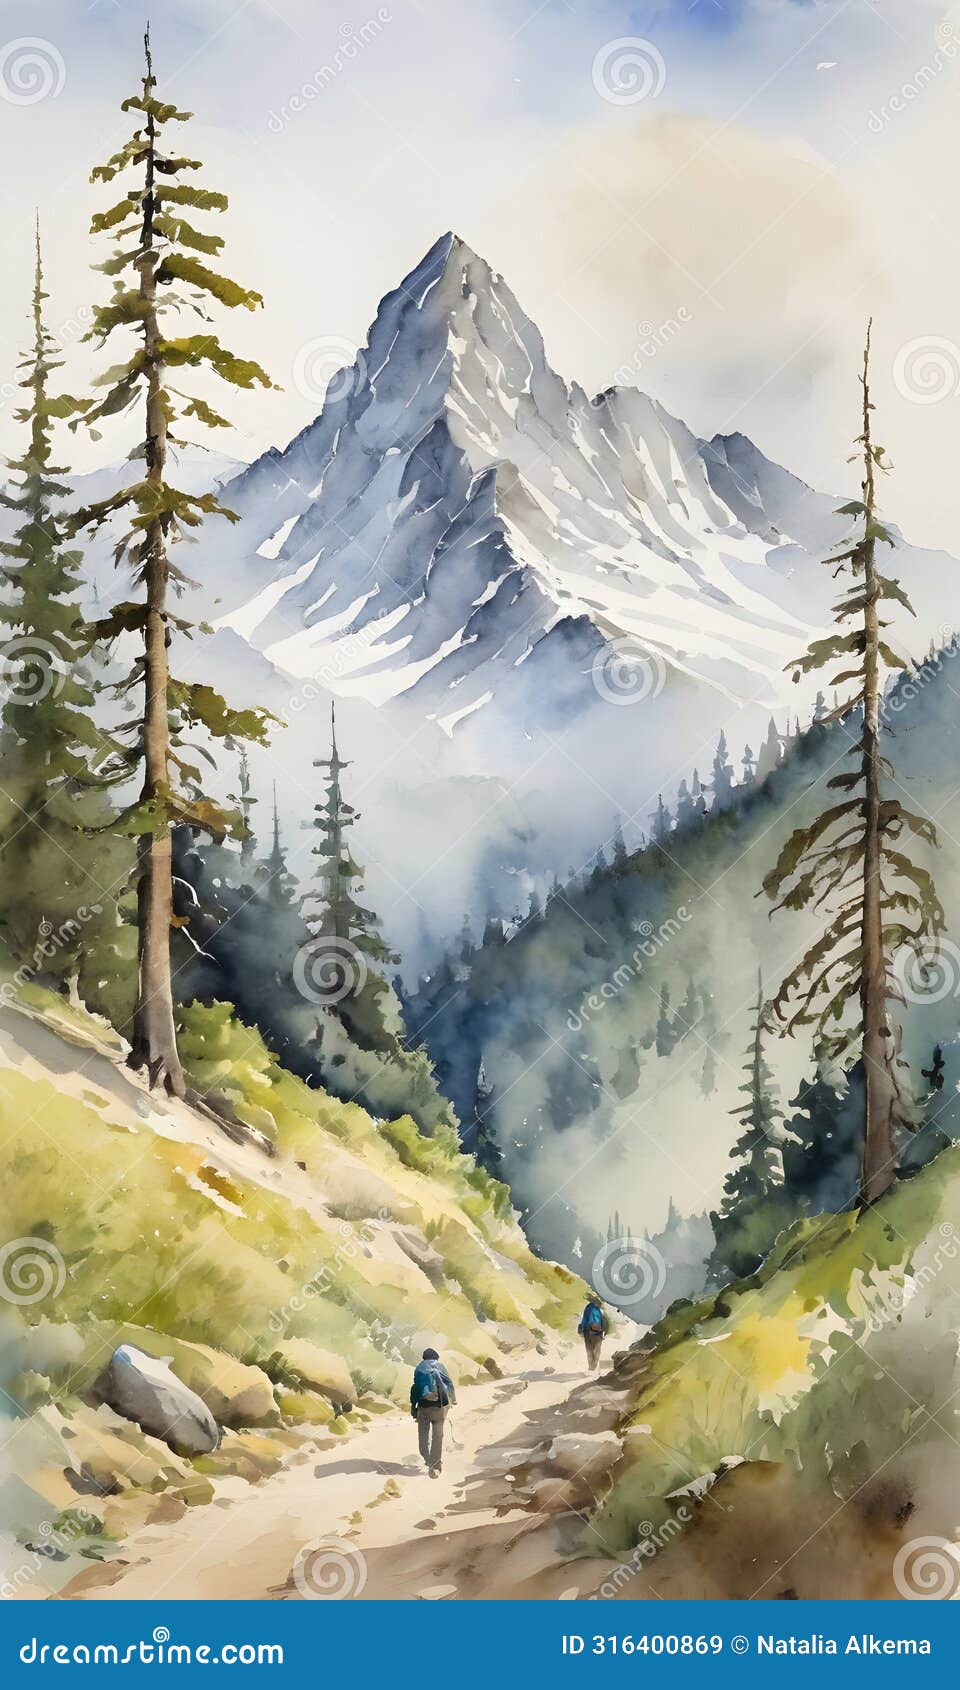 watercolor landscape of mountain explorers on serene trail. otdoor and environmental awareness campaigns concept. ai